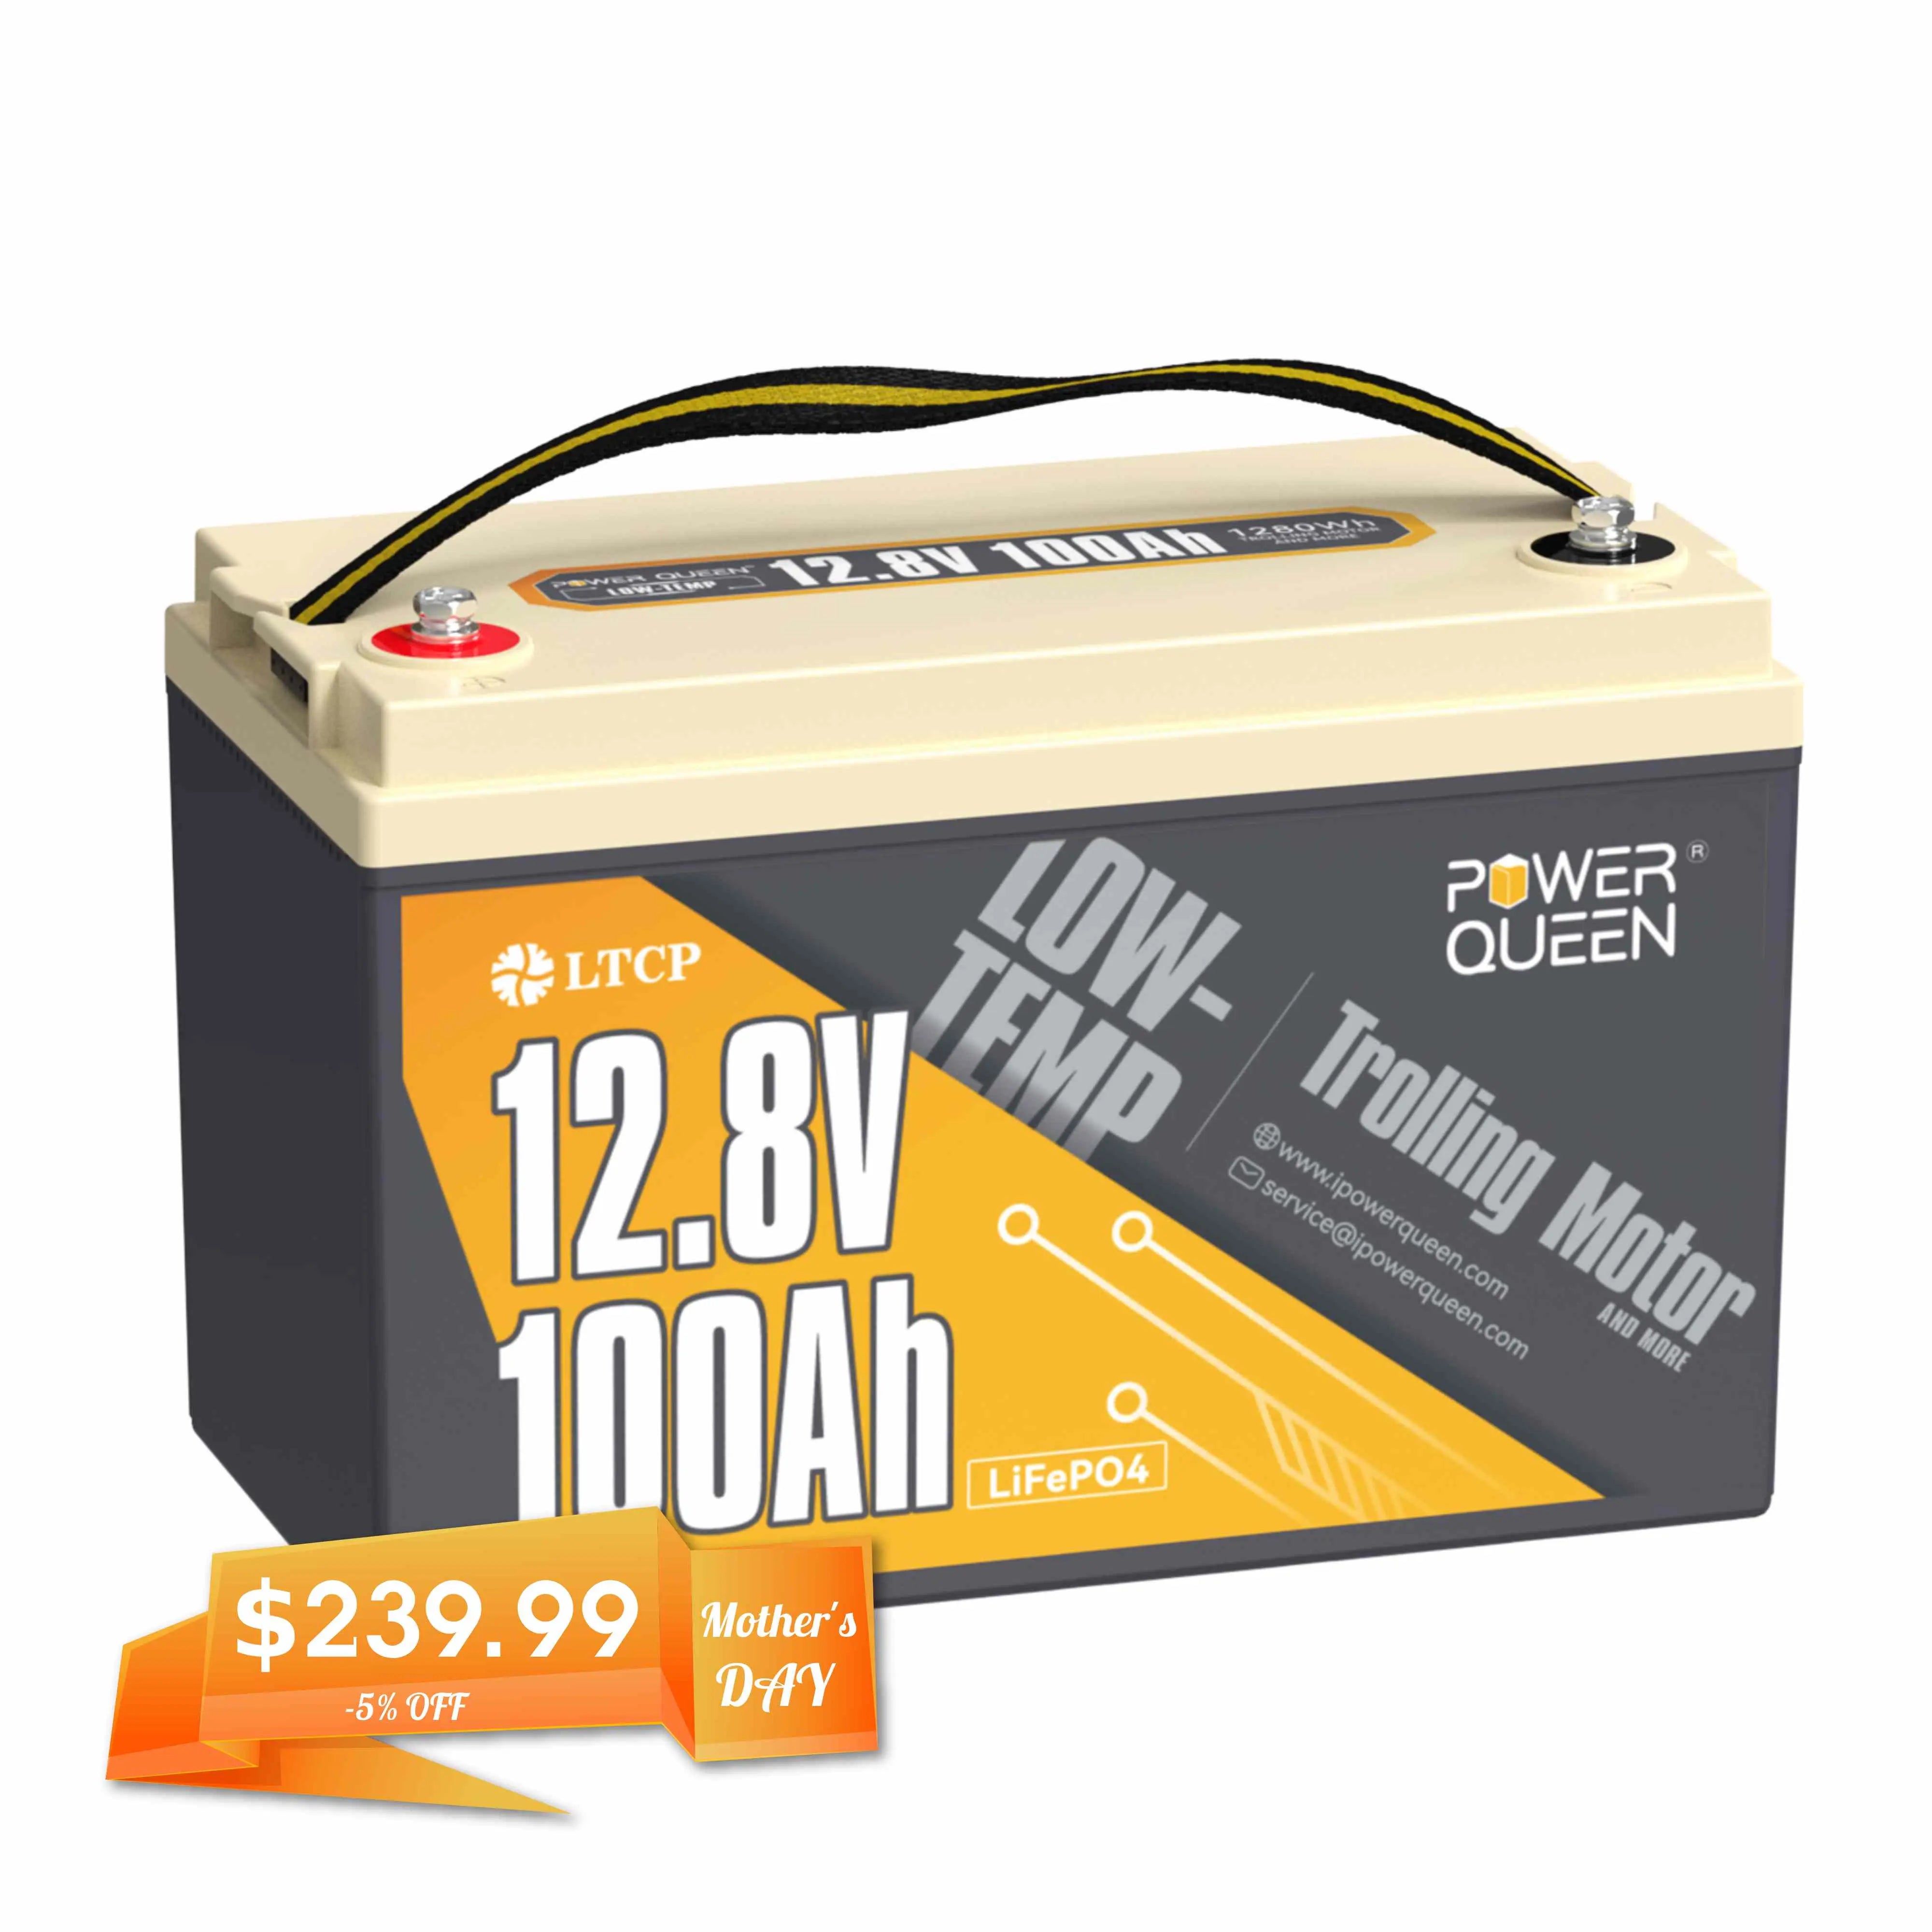 [Only $239] Power Queen 12.8V 100Ah Low-Temp Deep Cycle Lithium Battery Power Queen